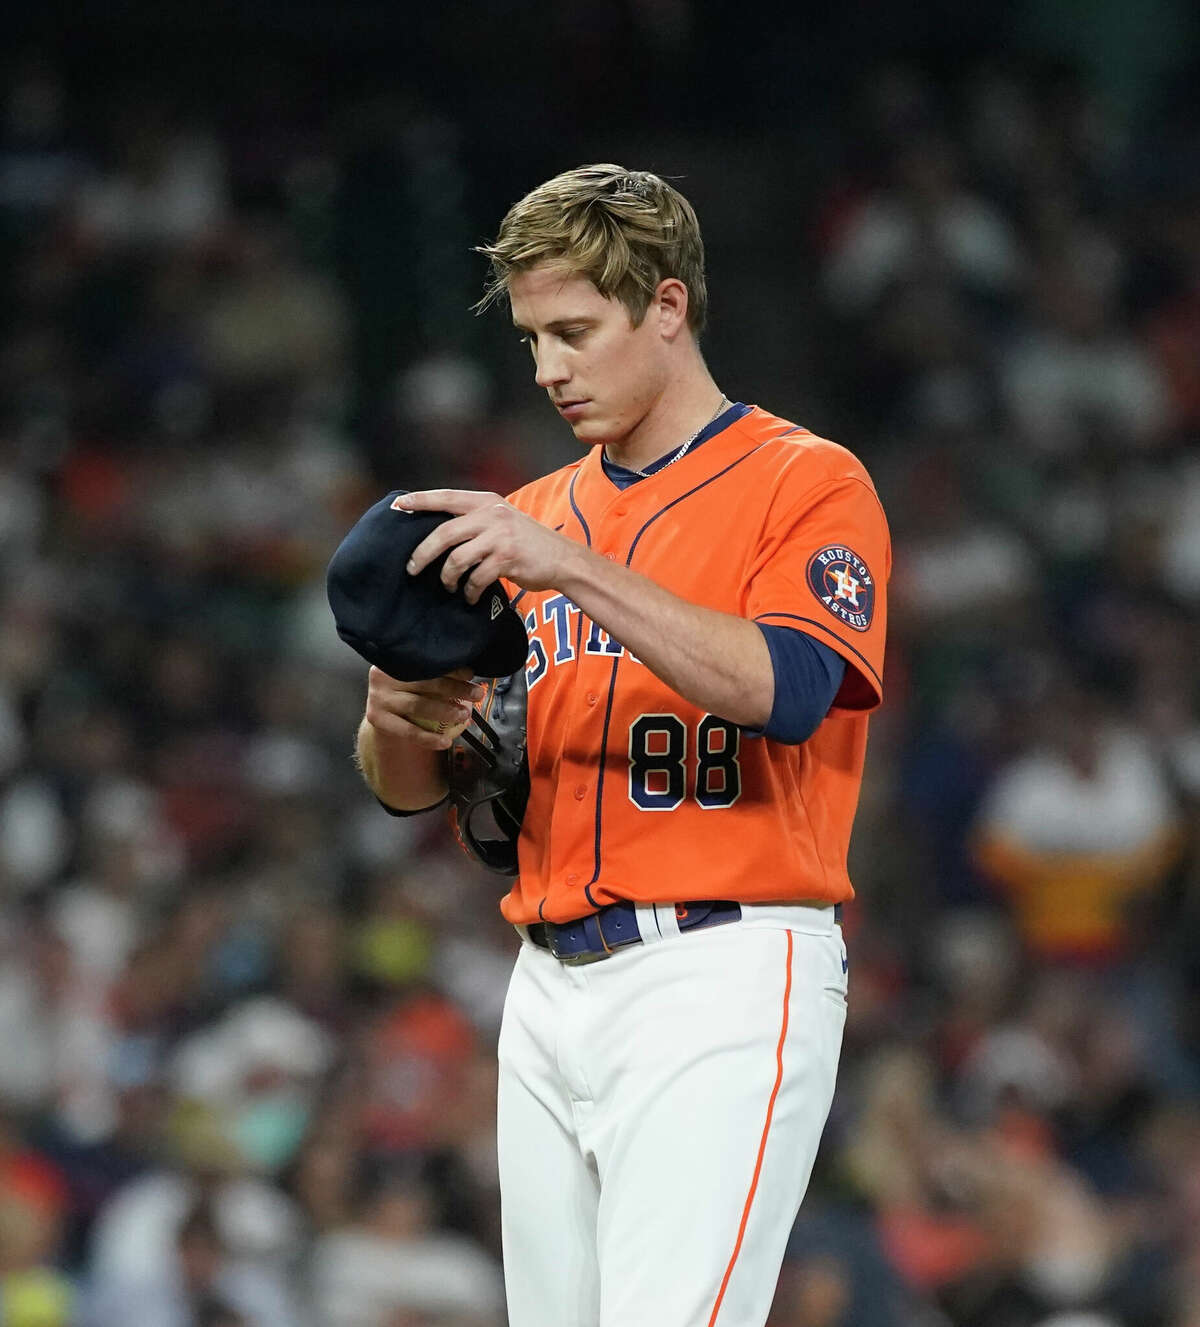 Houston Astros relief pitcher Phil Maton (88) adjusts his cap during the eighth inning of an MLB baseball game at Minute Maid Park on Friday, May 6, 2022 in Houston.